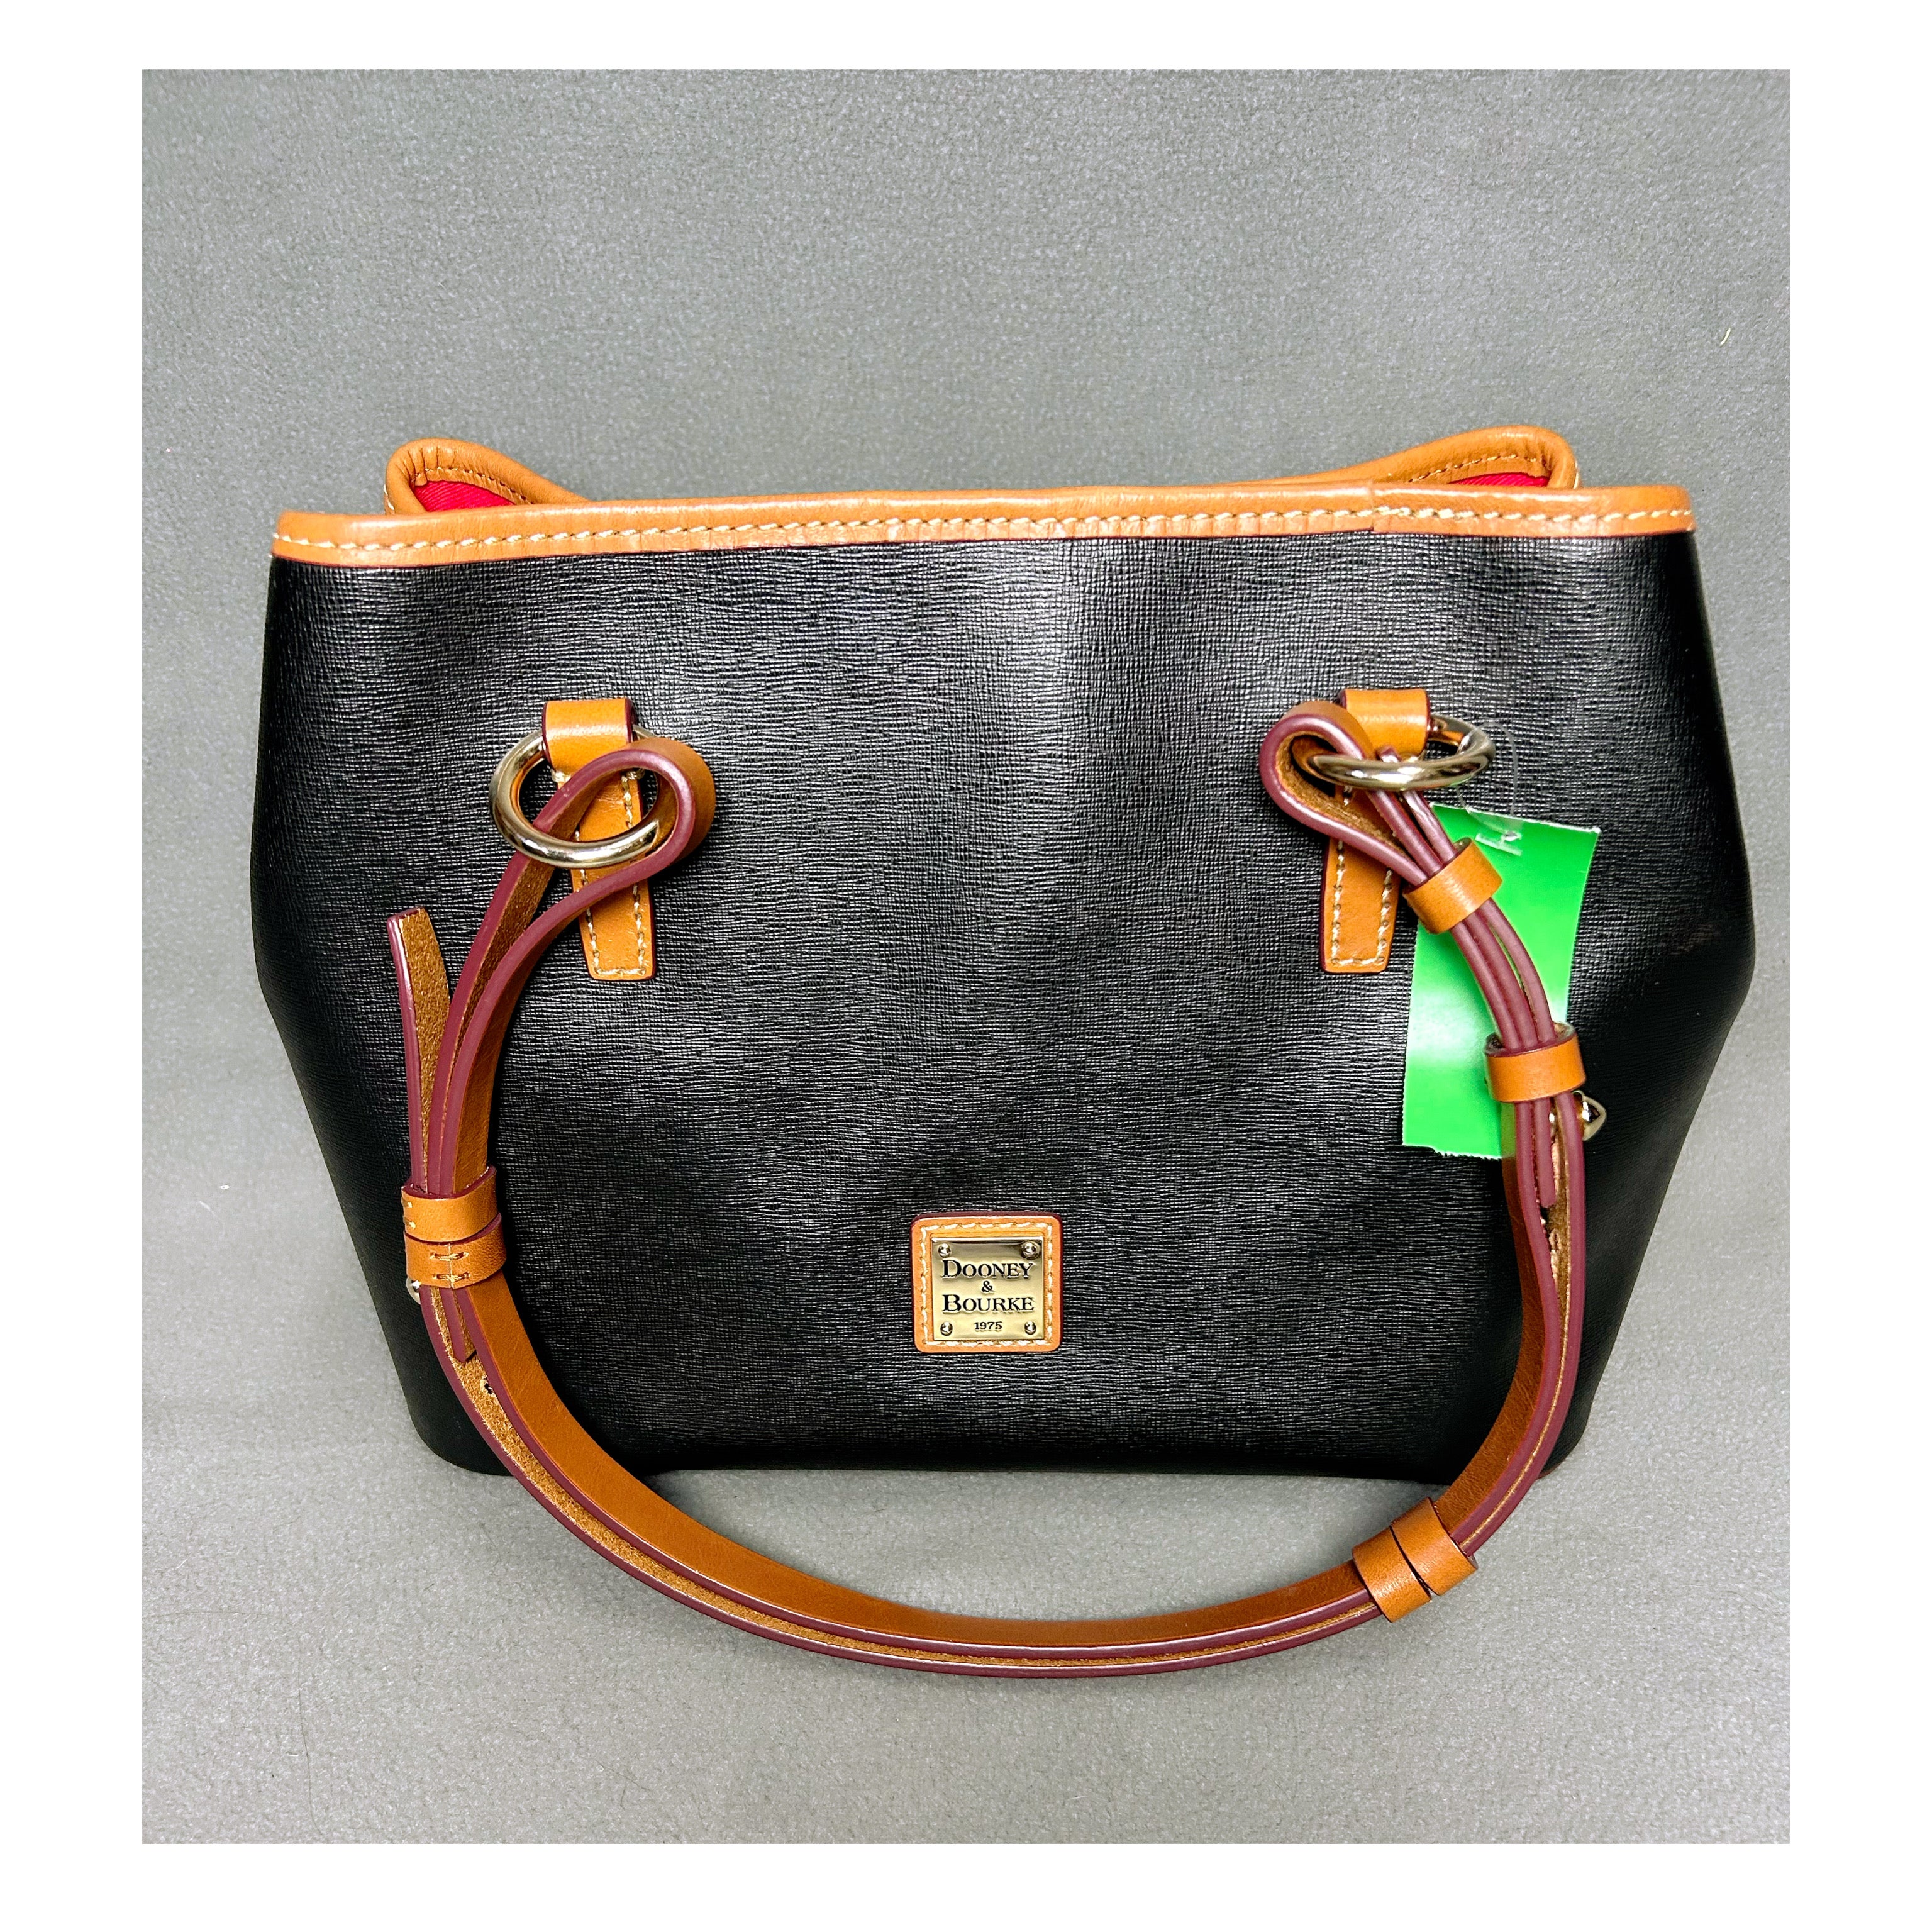 Dooney & Bourke black Briana bag, NEW WITHOUT TAGS!